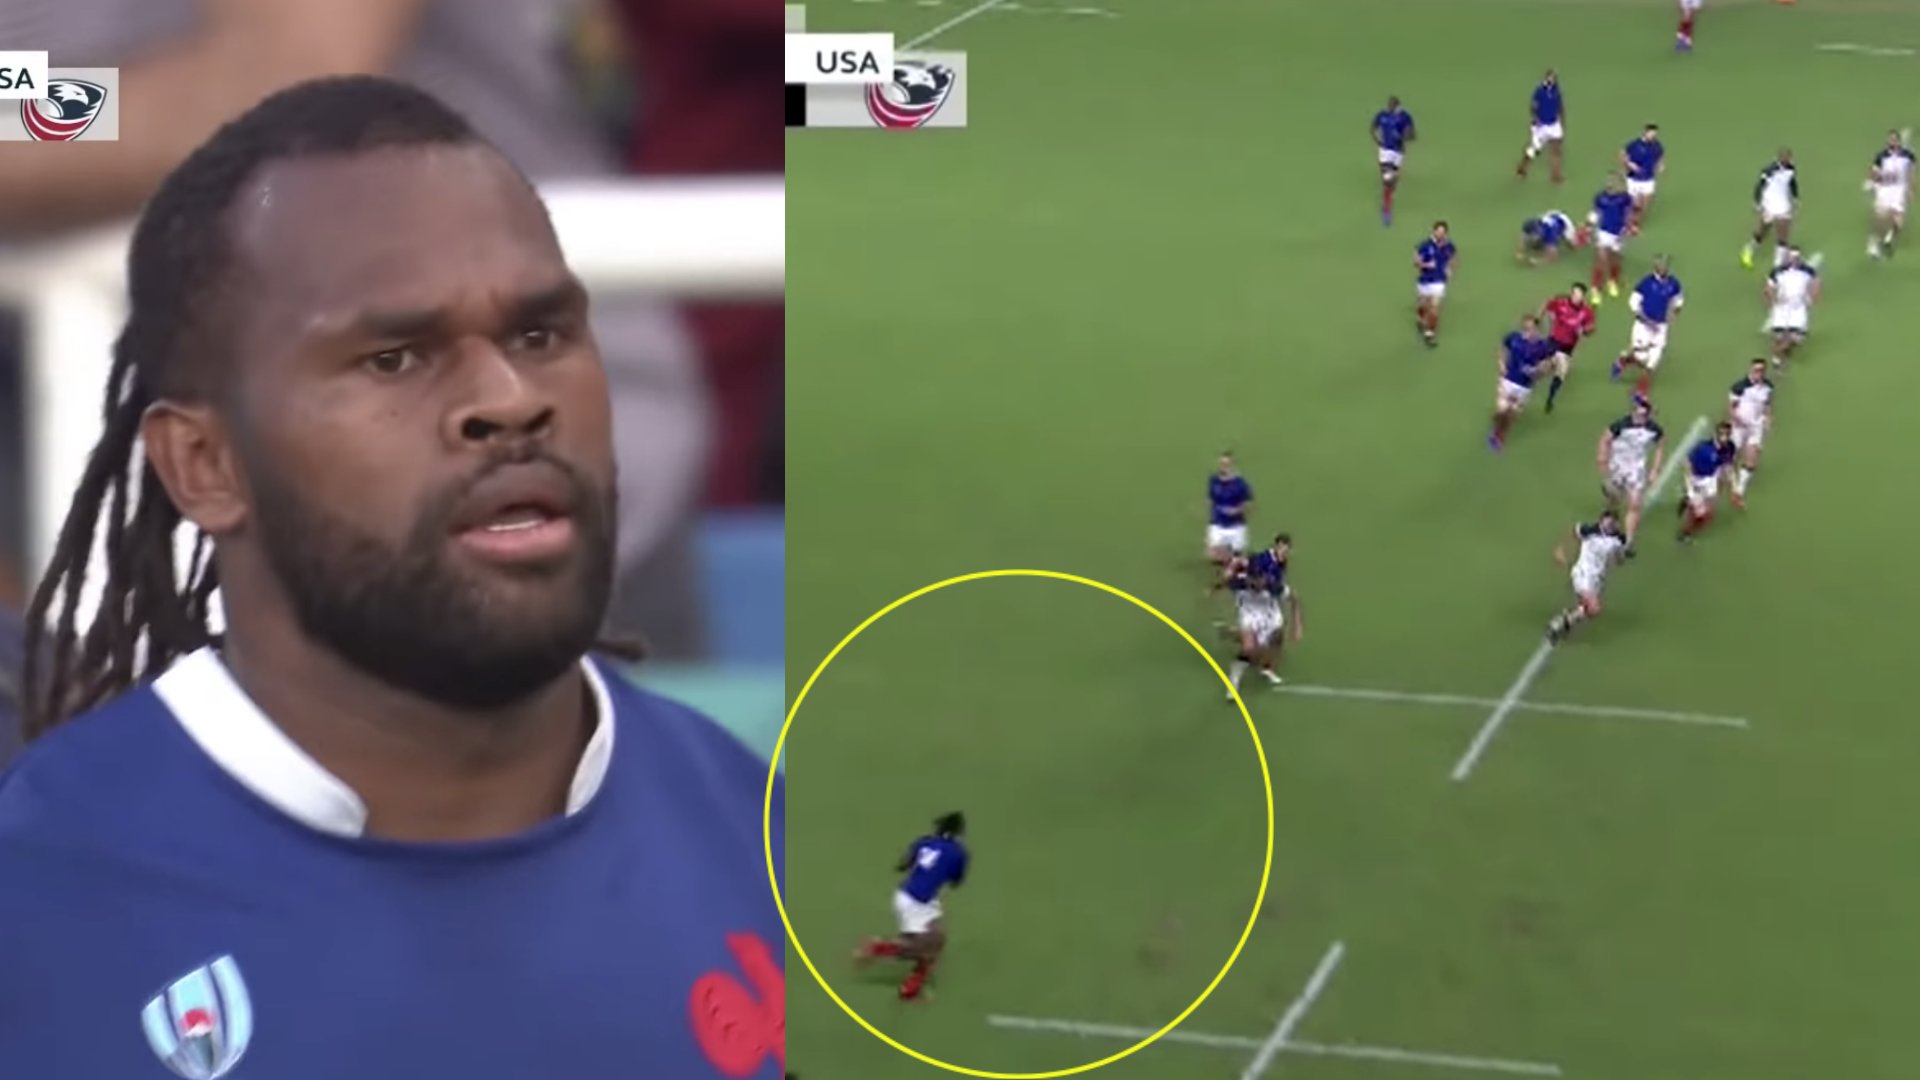 France have England on red alert after they did this against the USA